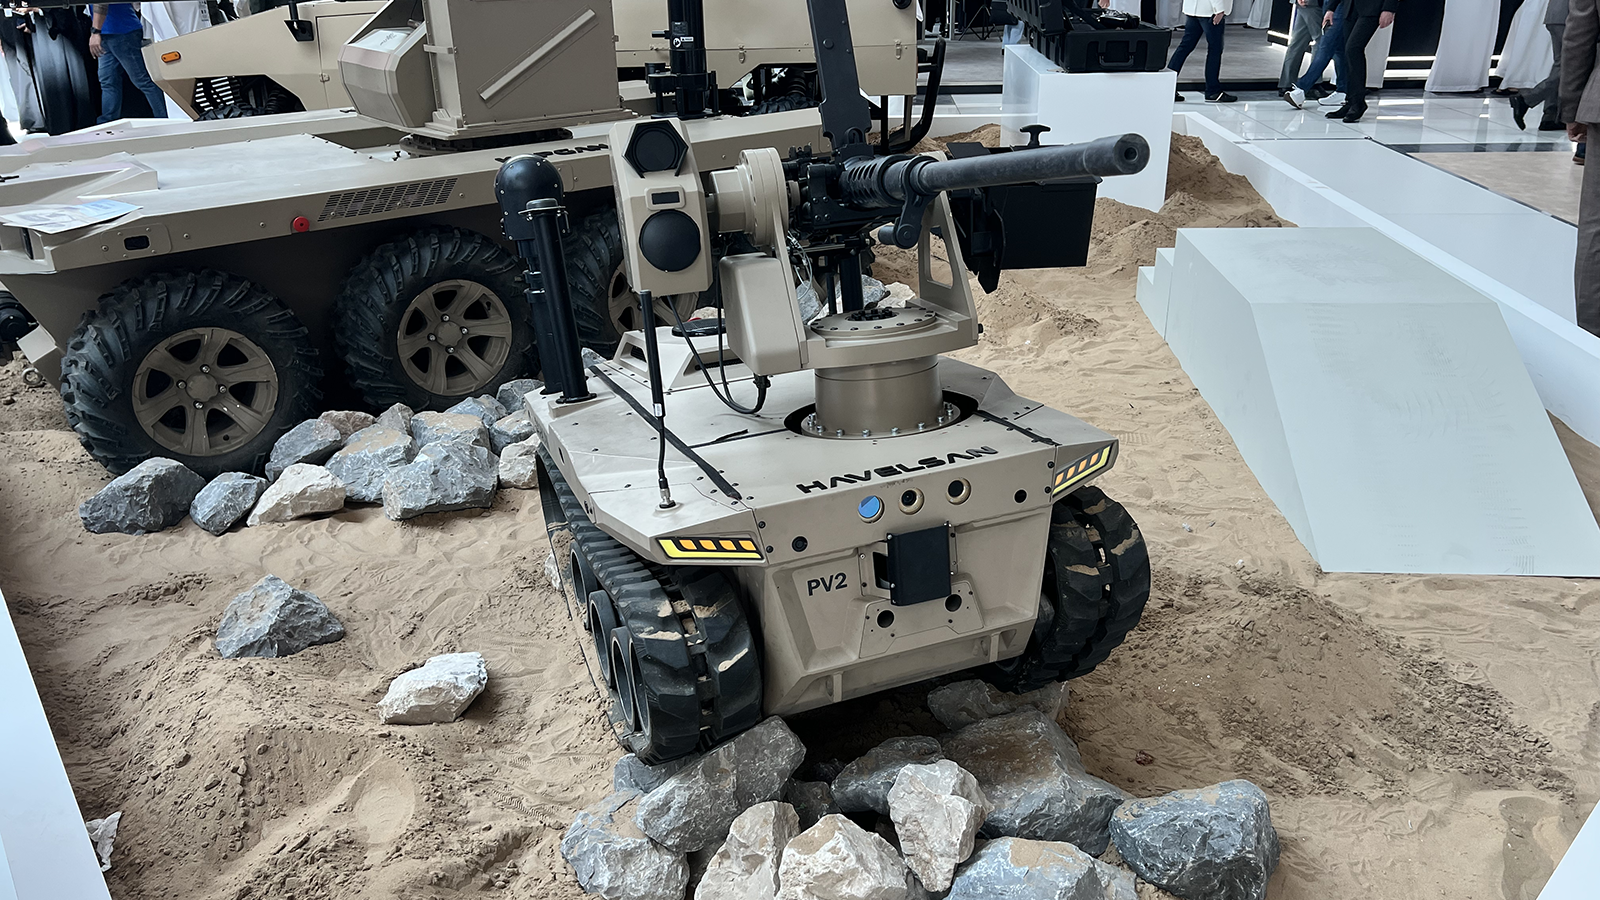 The sights of IDEX 2023 Day 3 [PHOTOS] - Breaking Defense